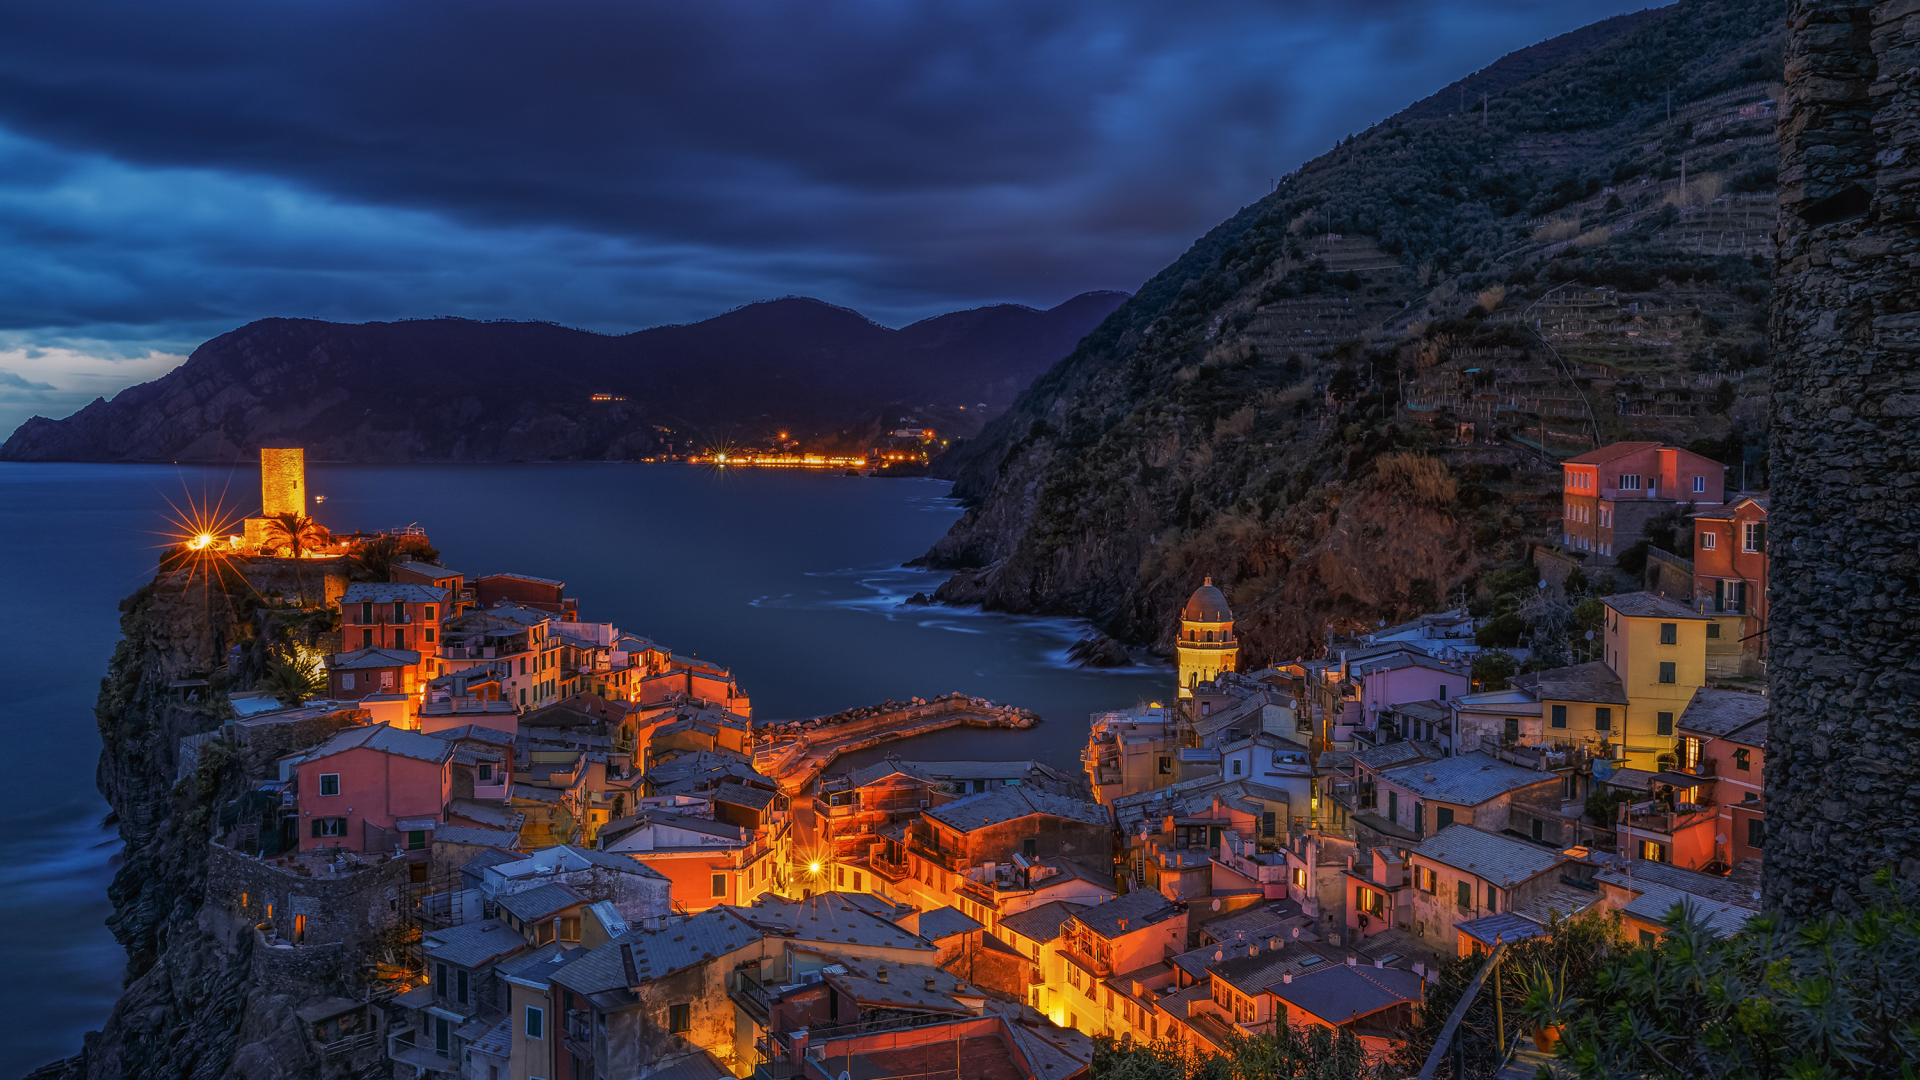 General 1920x1080 architecture building old building Vernazza Italy village cliff mountains sea clouds evening lights house coast Cinque Terre Liguria